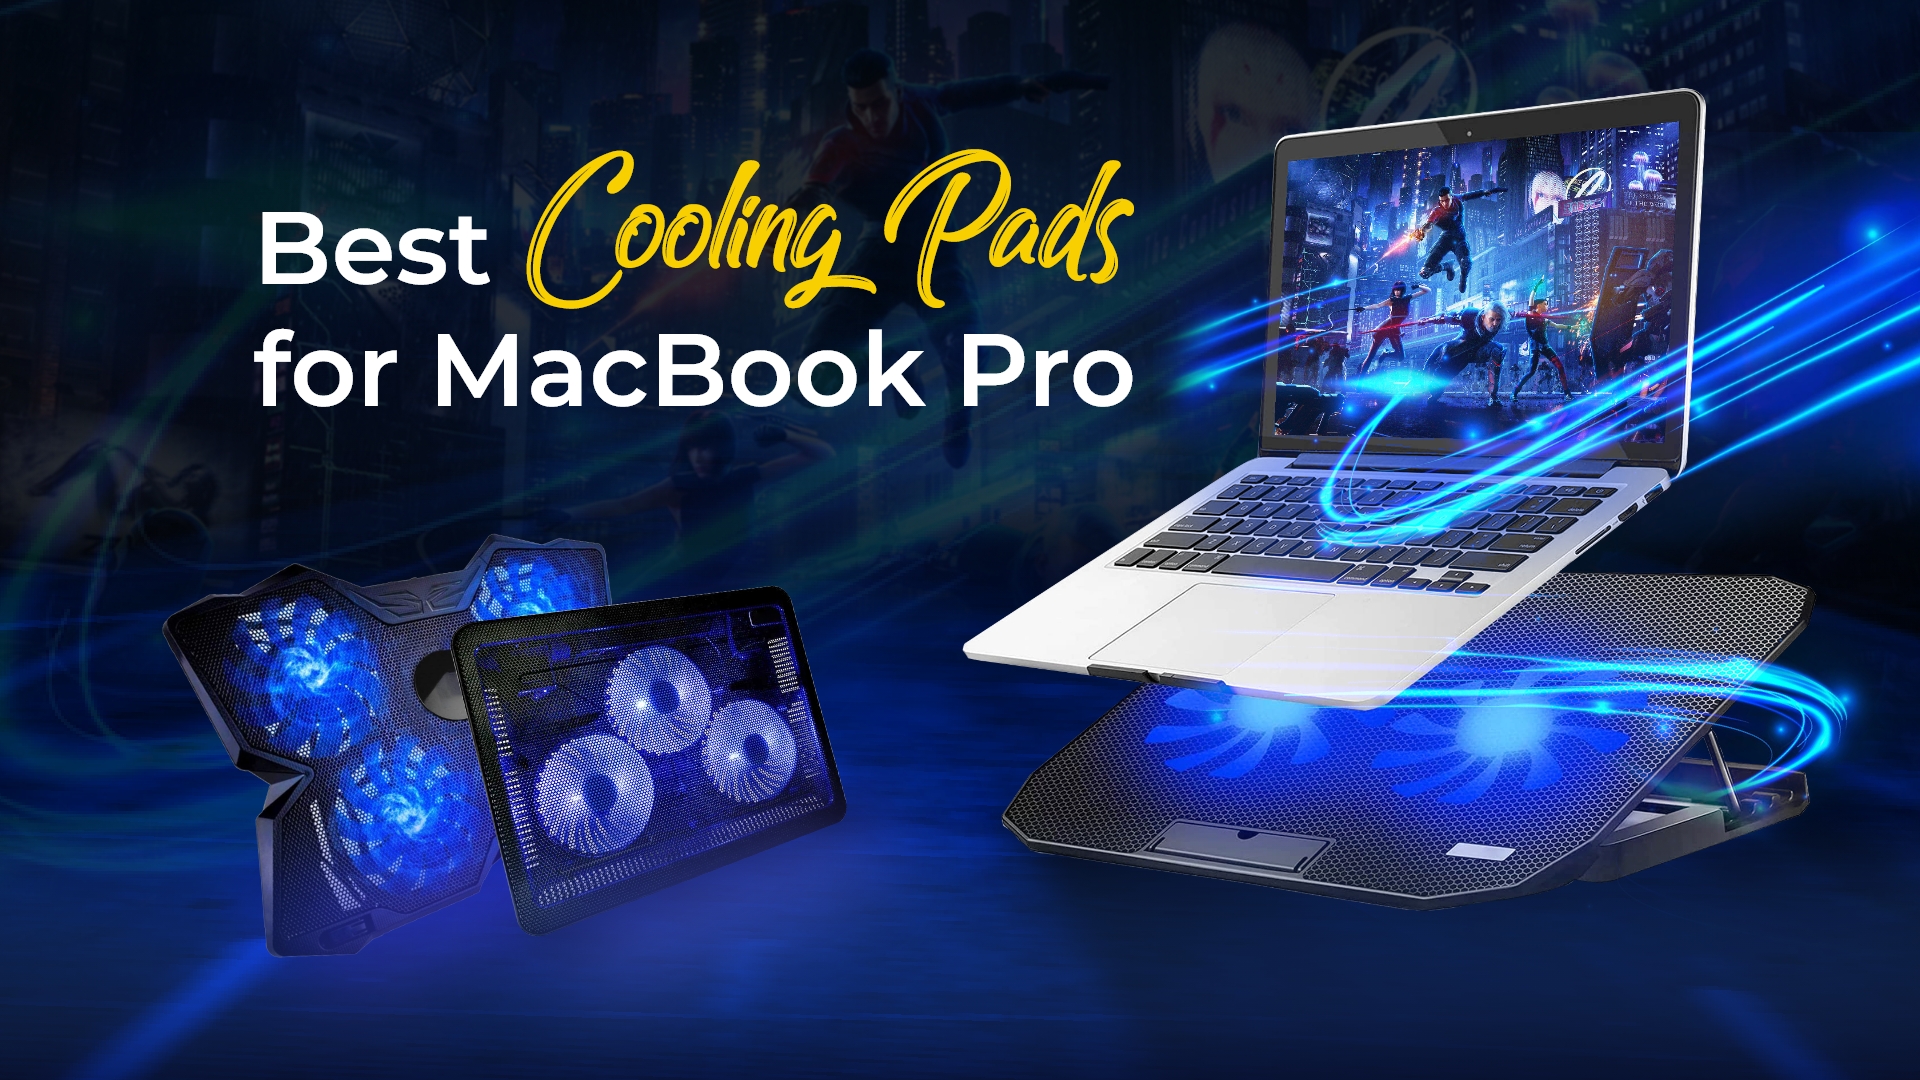 10 Best Cooling Pads for MacBook Pro in 2022